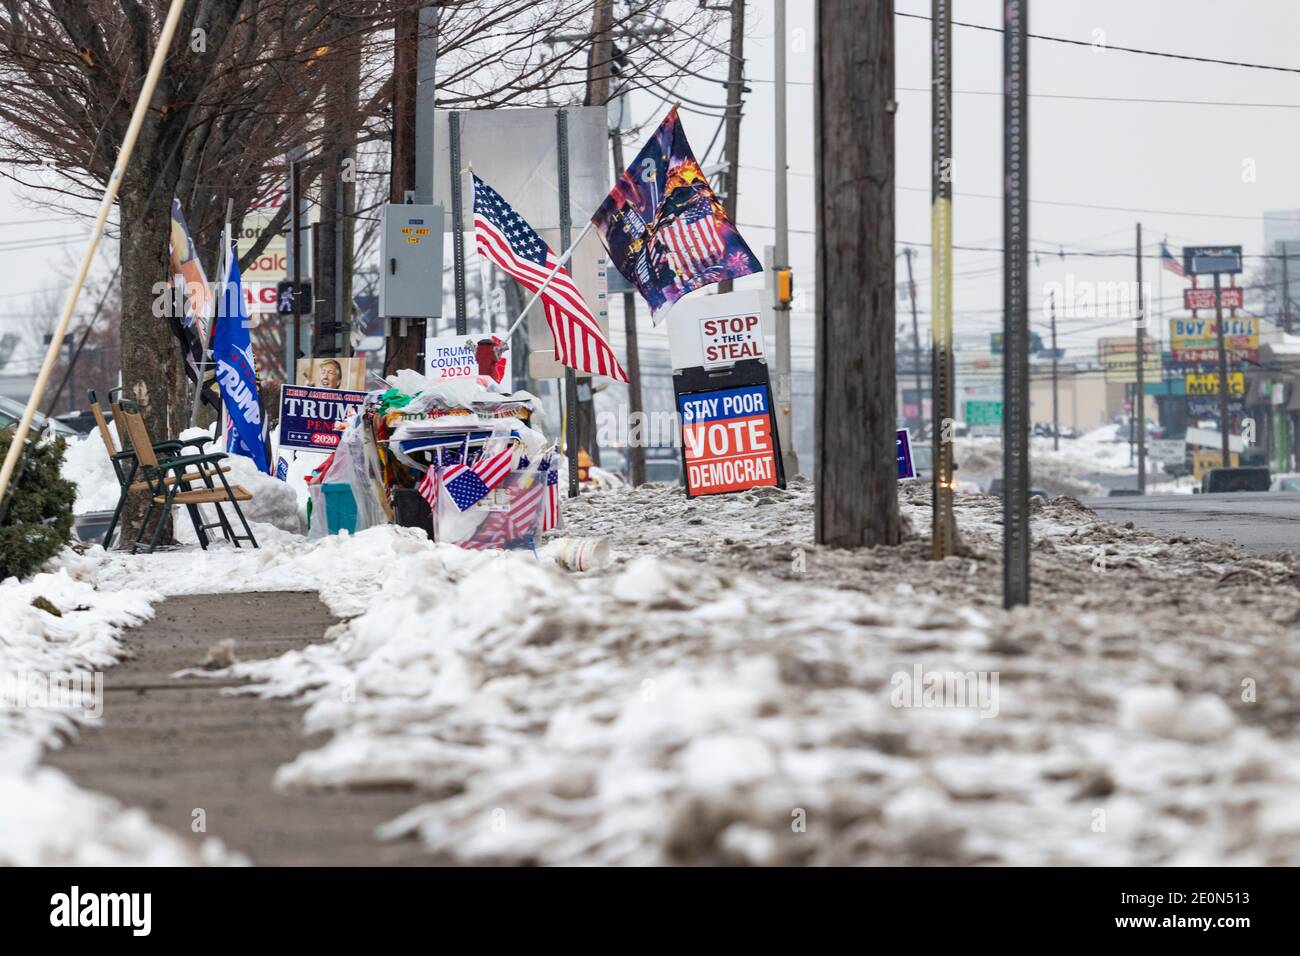 Various pro-Trump and anti-Biden signs and flags, set up roadside by Trump supporters in the snow several weeks after Trump loss in the 2020 election Stock Photo